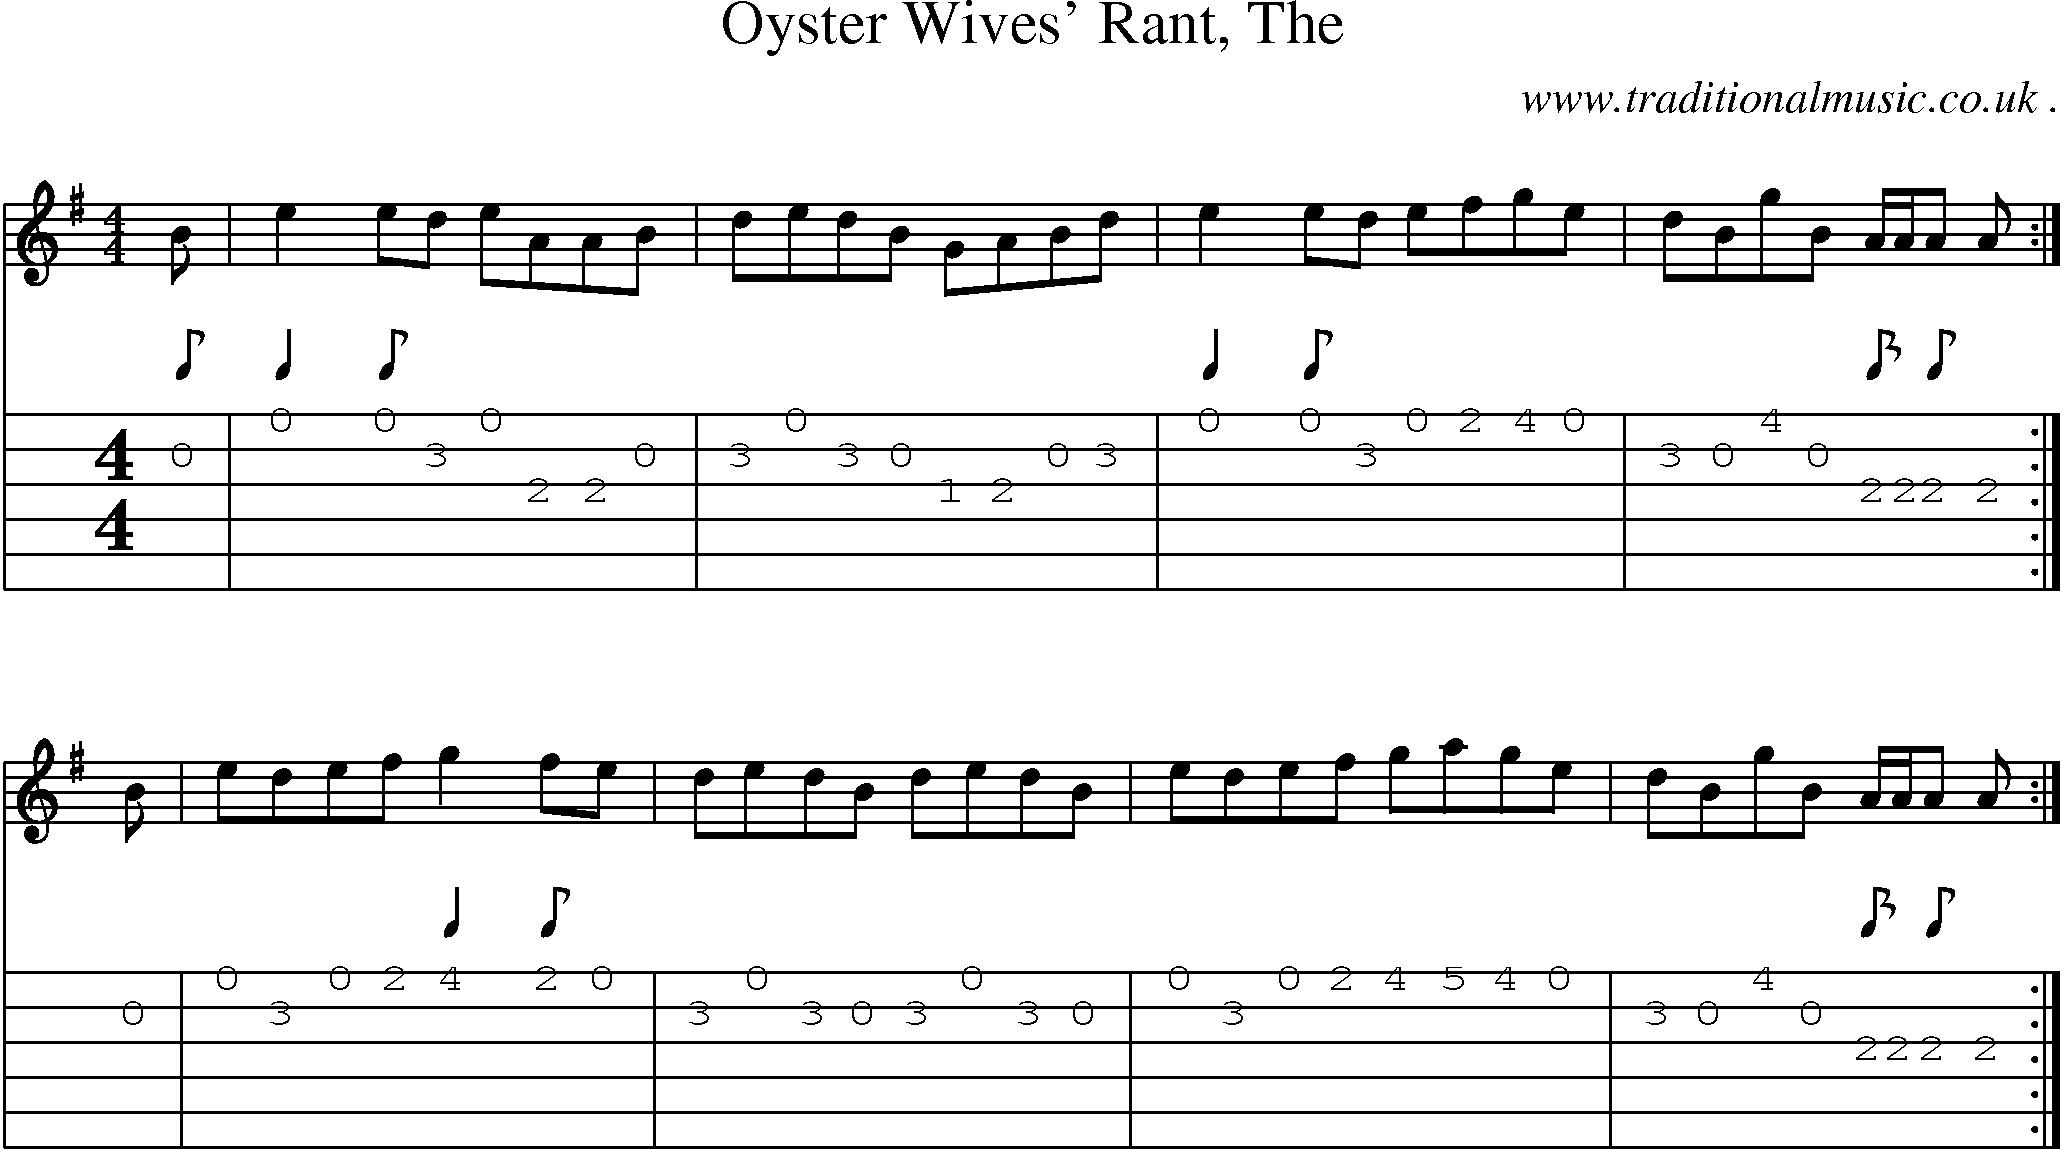 Sheet-music  score, Chords and Guitar Tabs for Oyster Wives Rant The